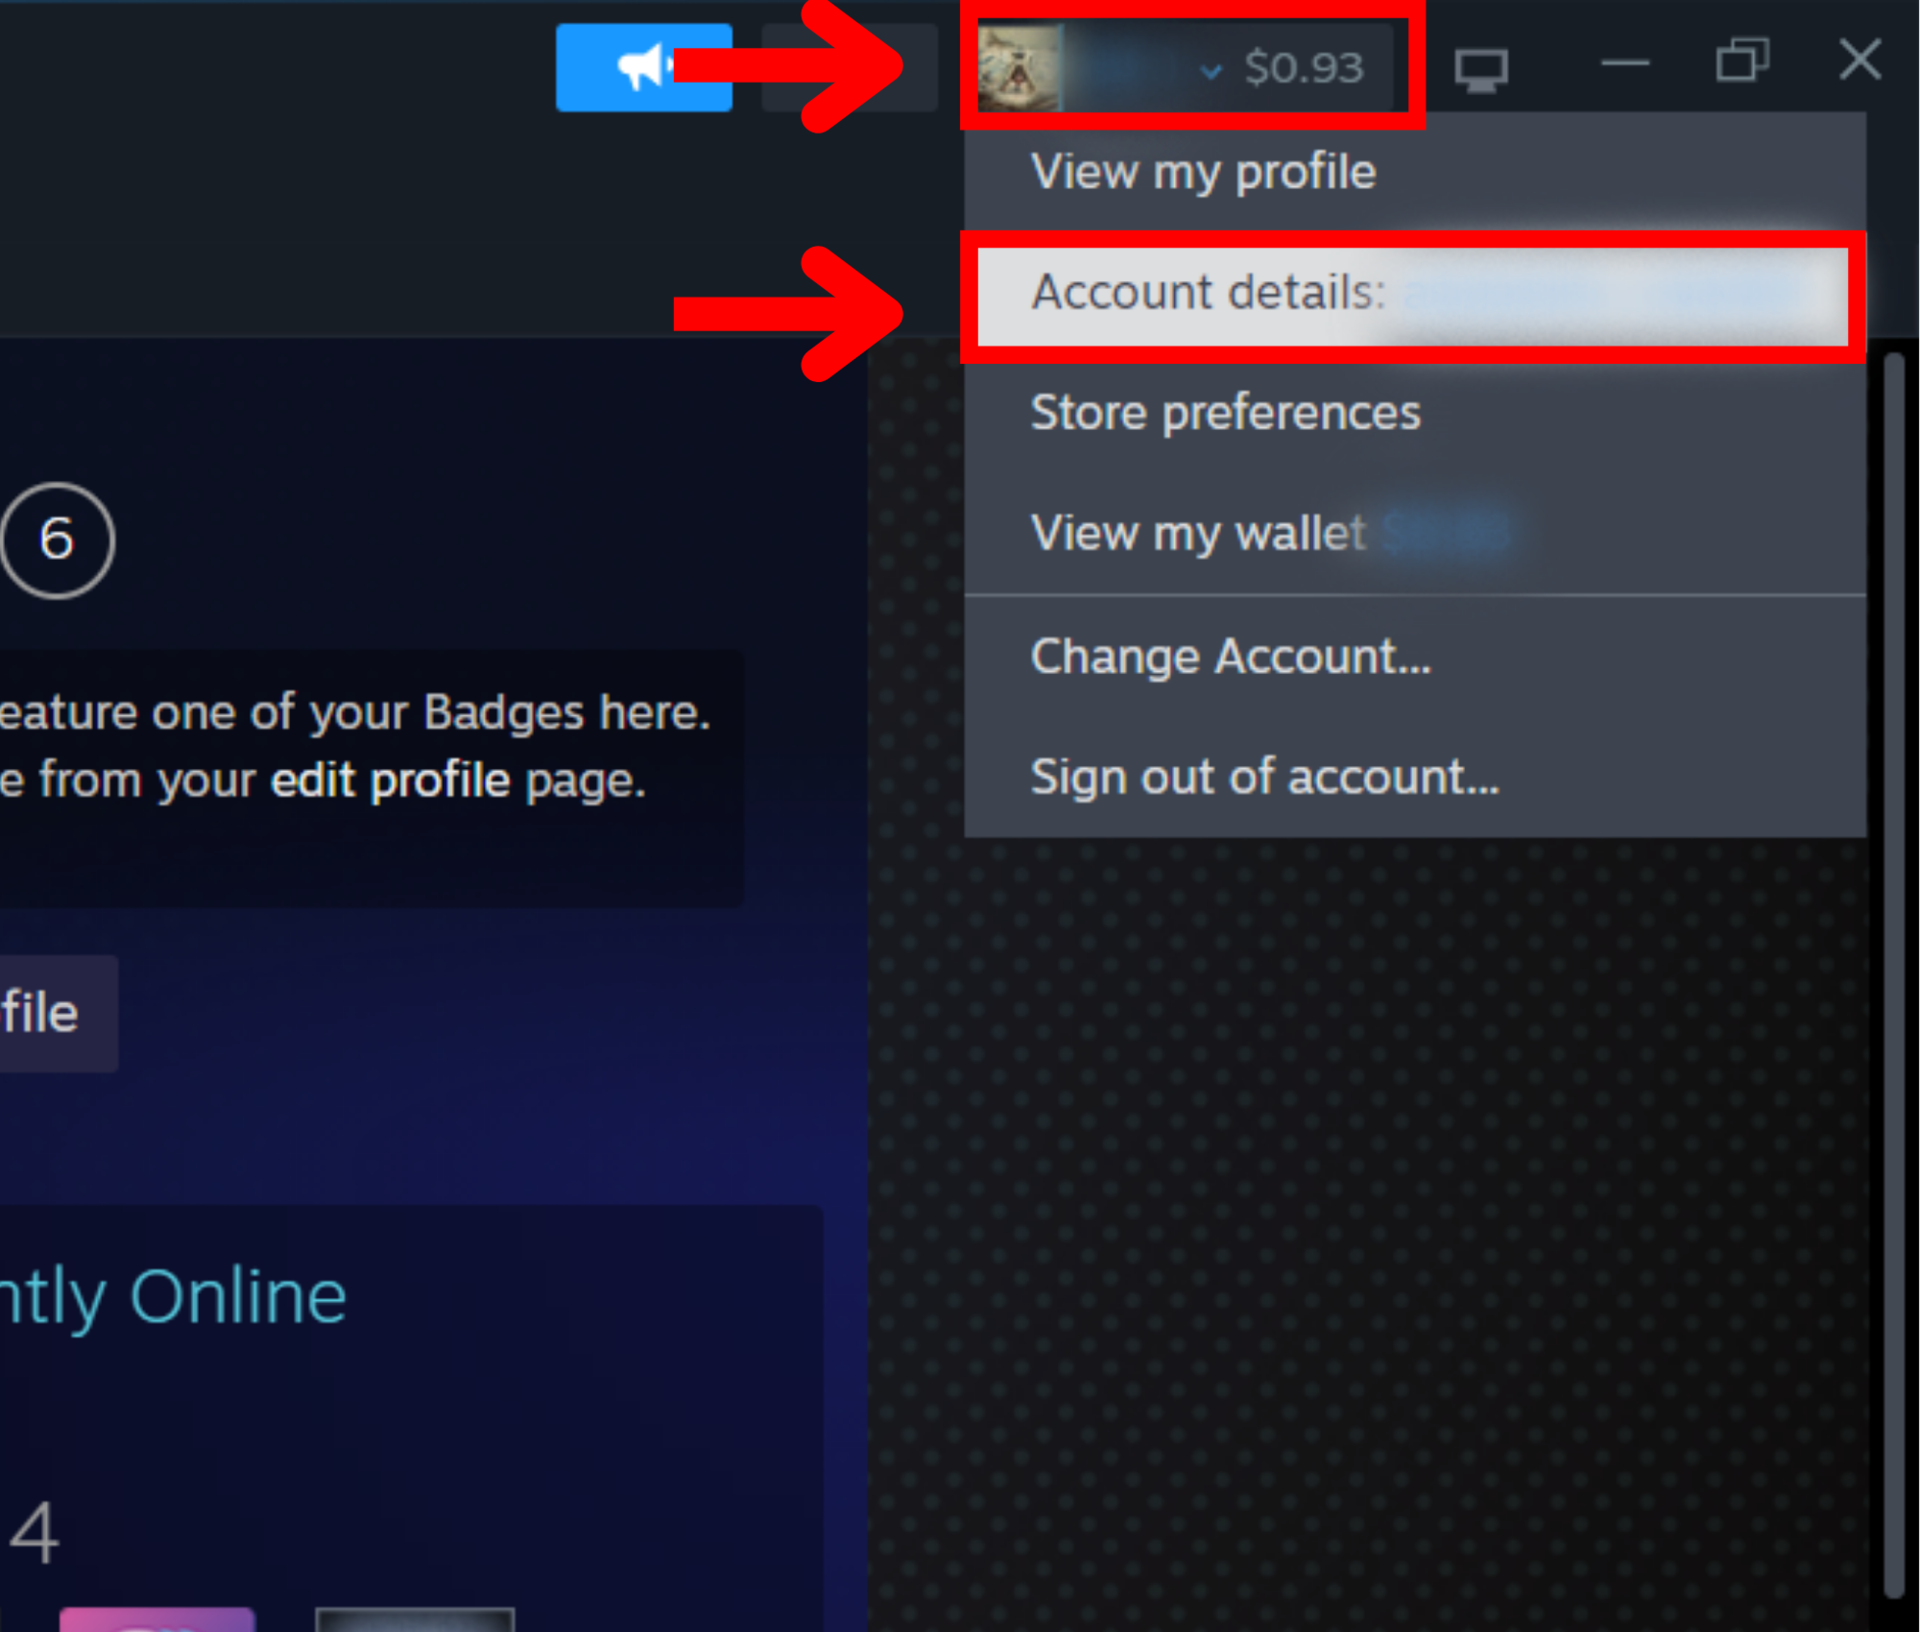 How to find your Steam ID